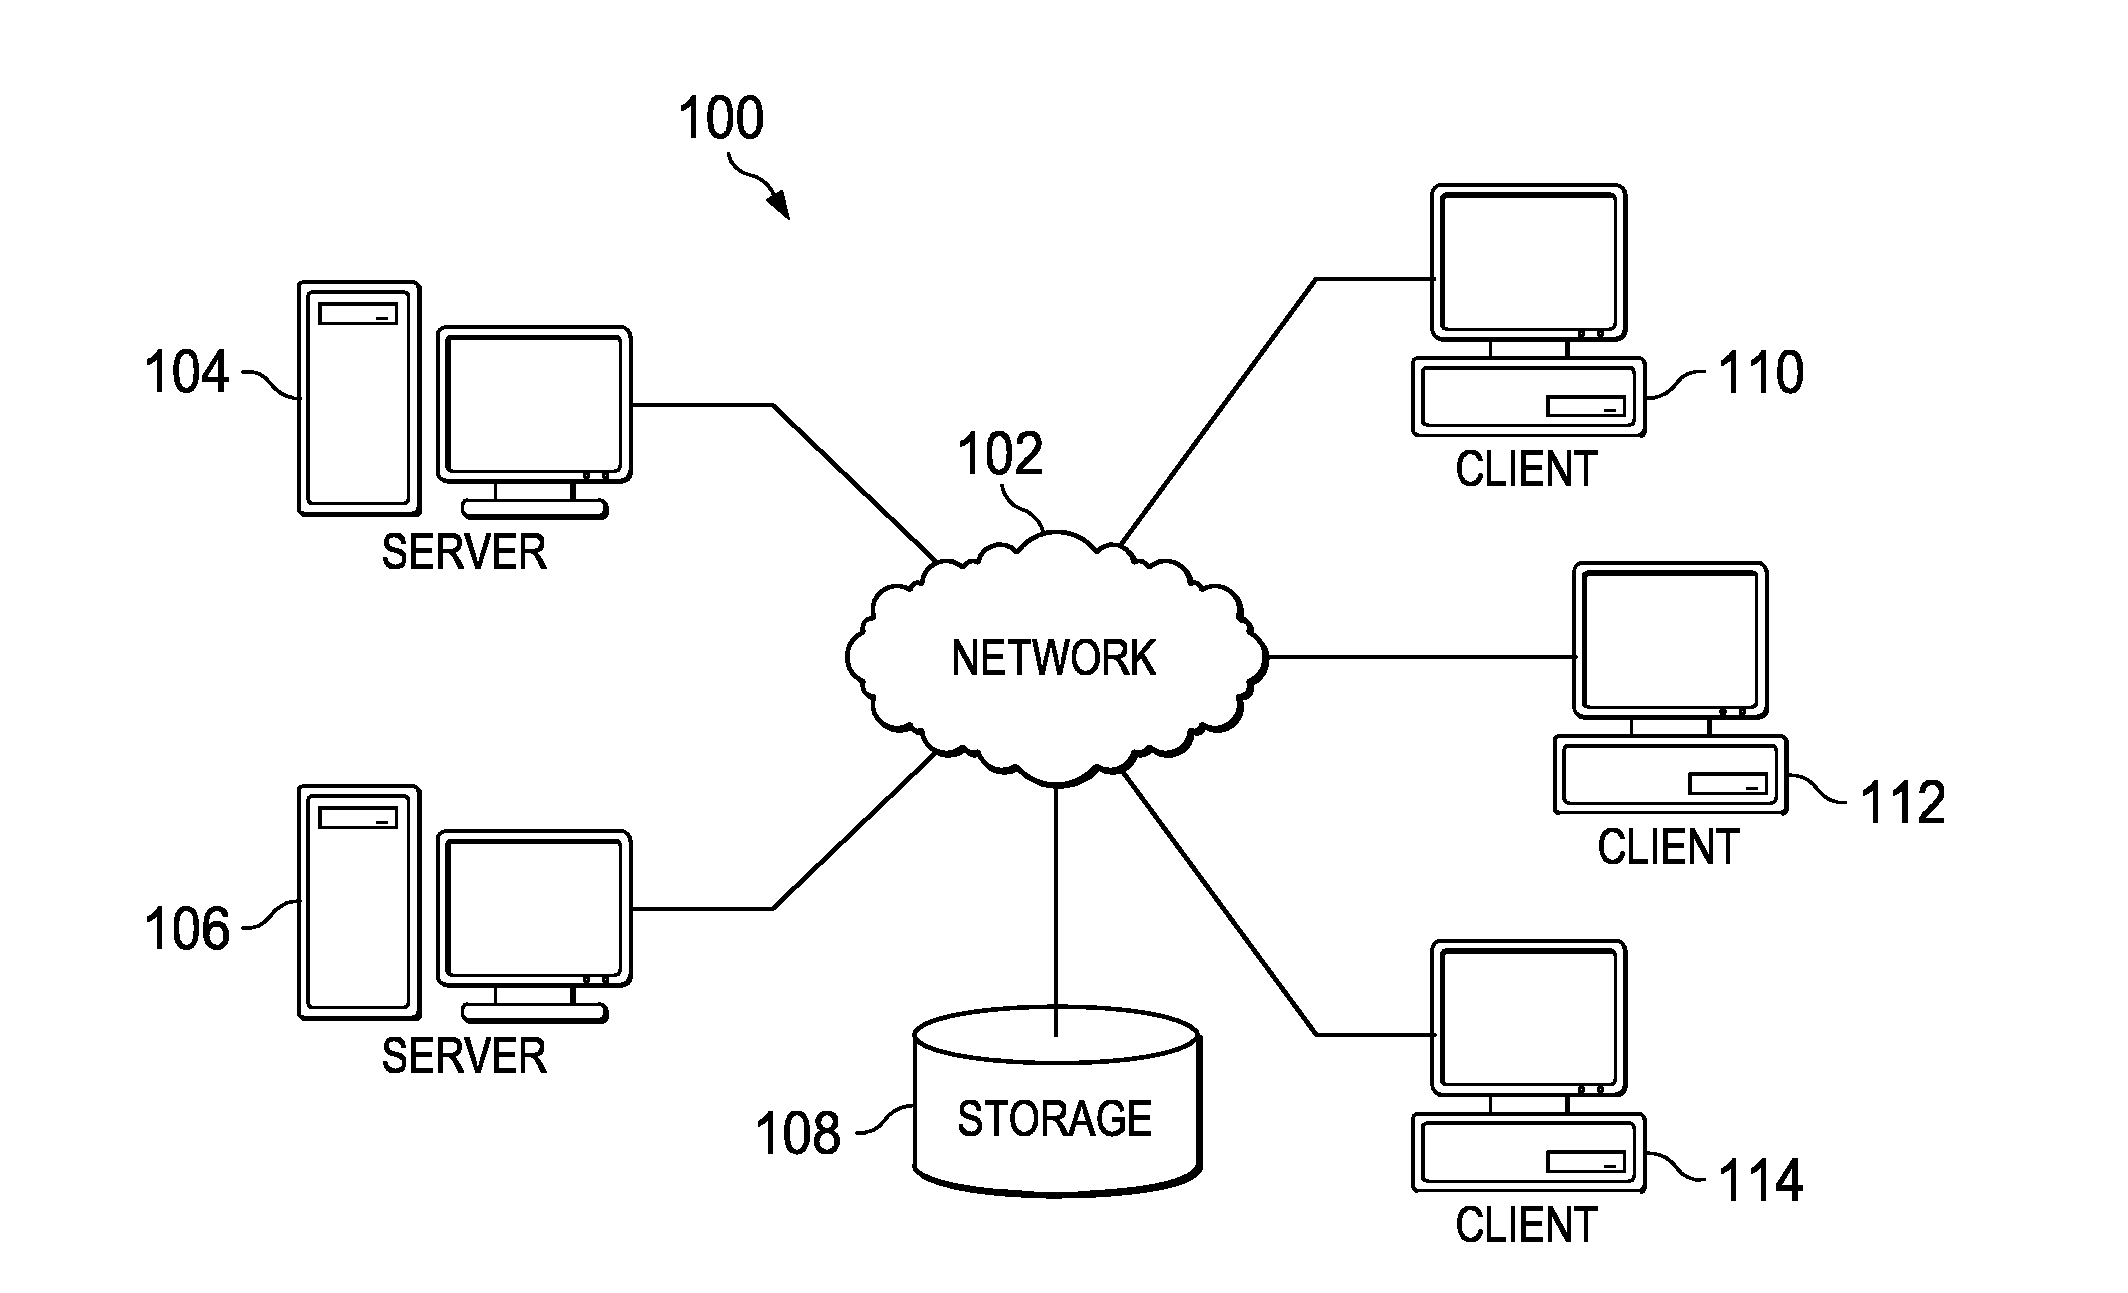 Method and apparatus for bridging real-world web applications and 3D virtual worlds